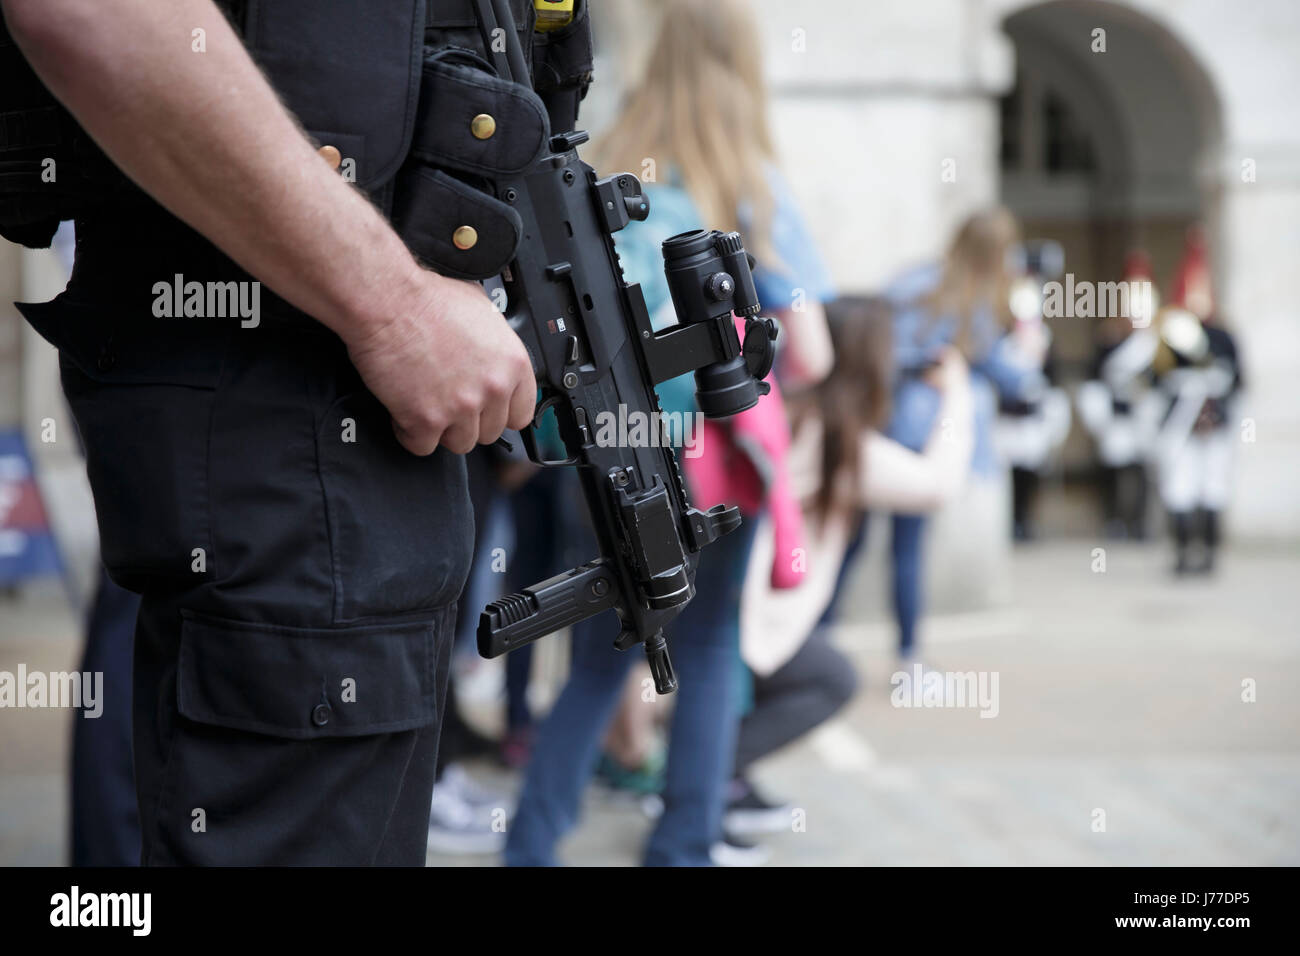 London, UK. 23rd May, 2017. An Armed policeman is pictured after Manchester Arena bombing, in London, UK, on May 23, 2017. Credit: Tim Ireland/Xinhua/Alamy Live News Stock Photo